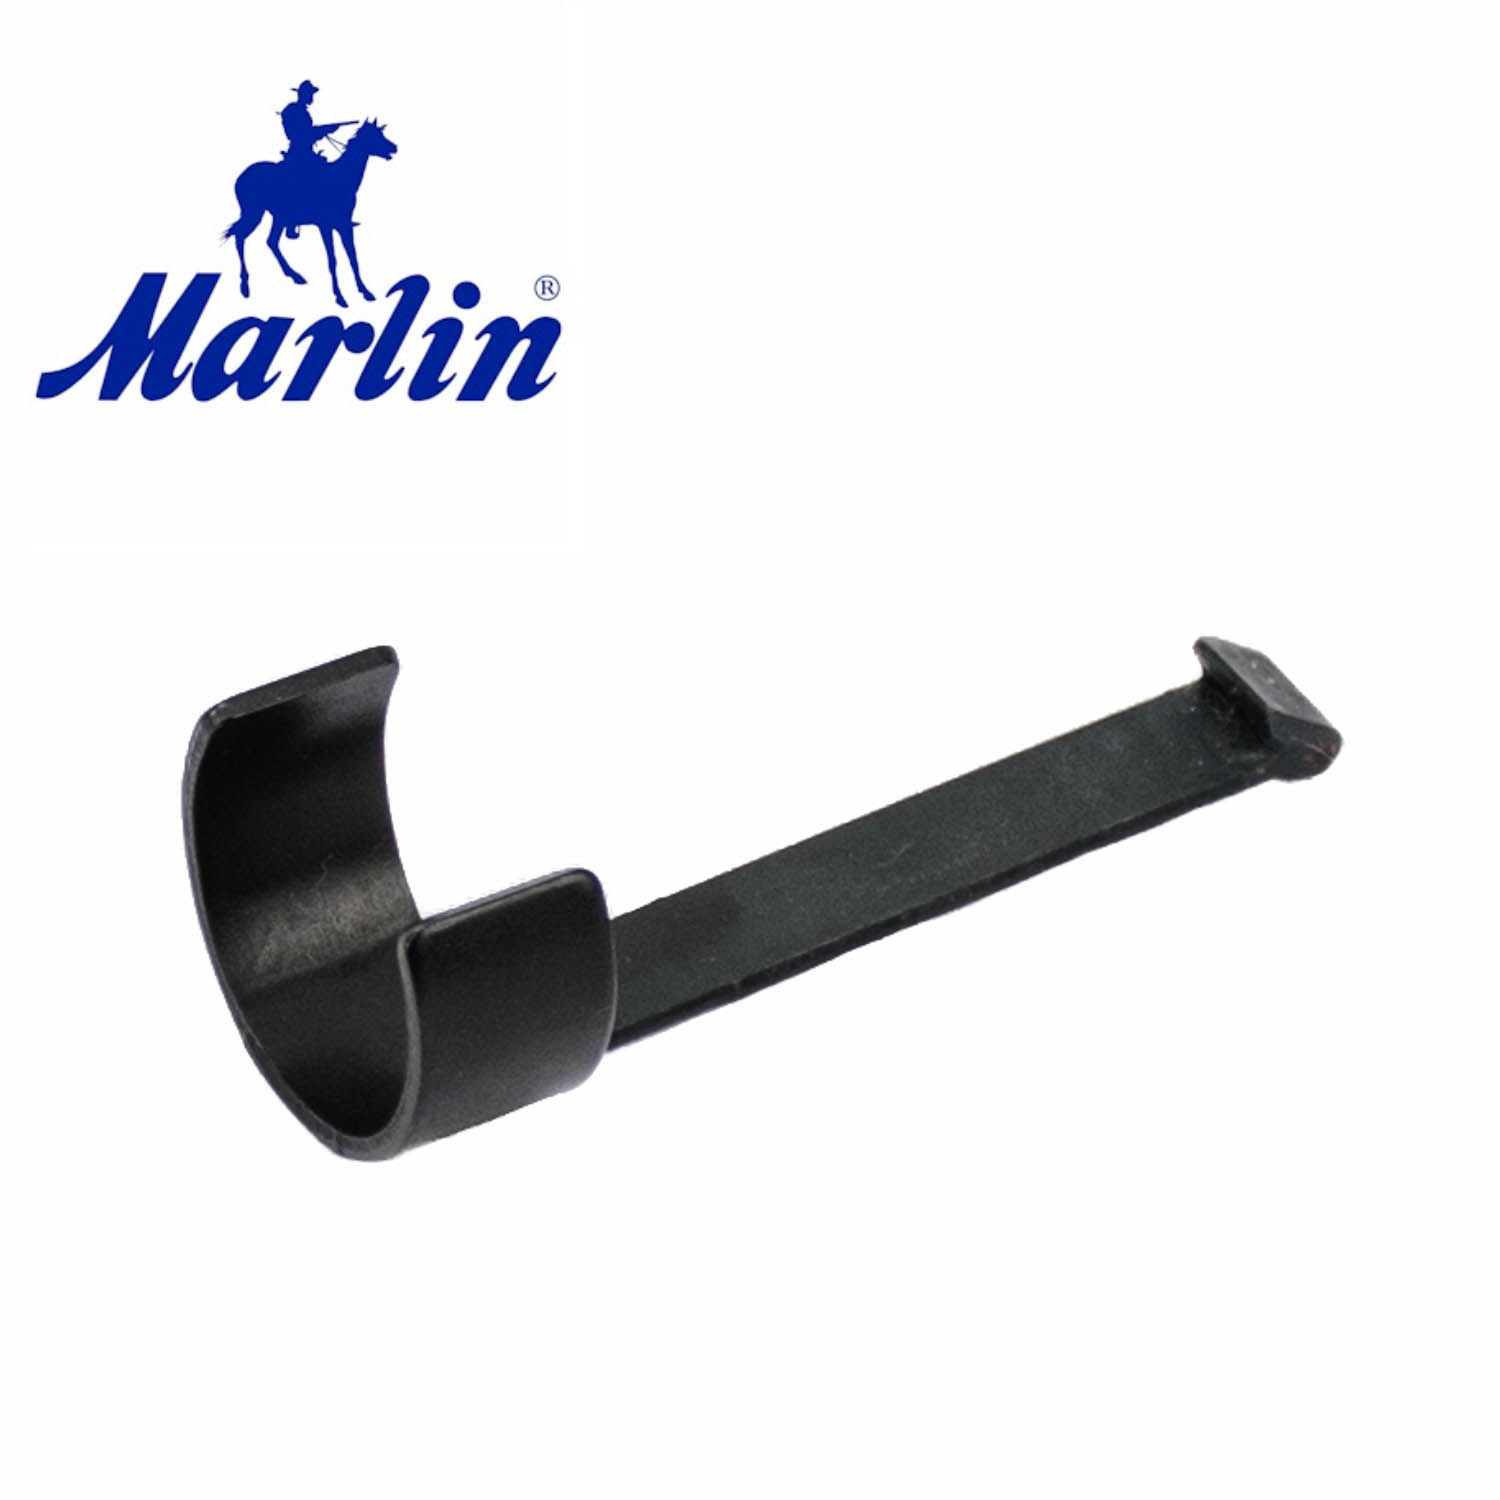 fits both 30-30 and .35 Remington models A00078 Marlin 336 extractor 